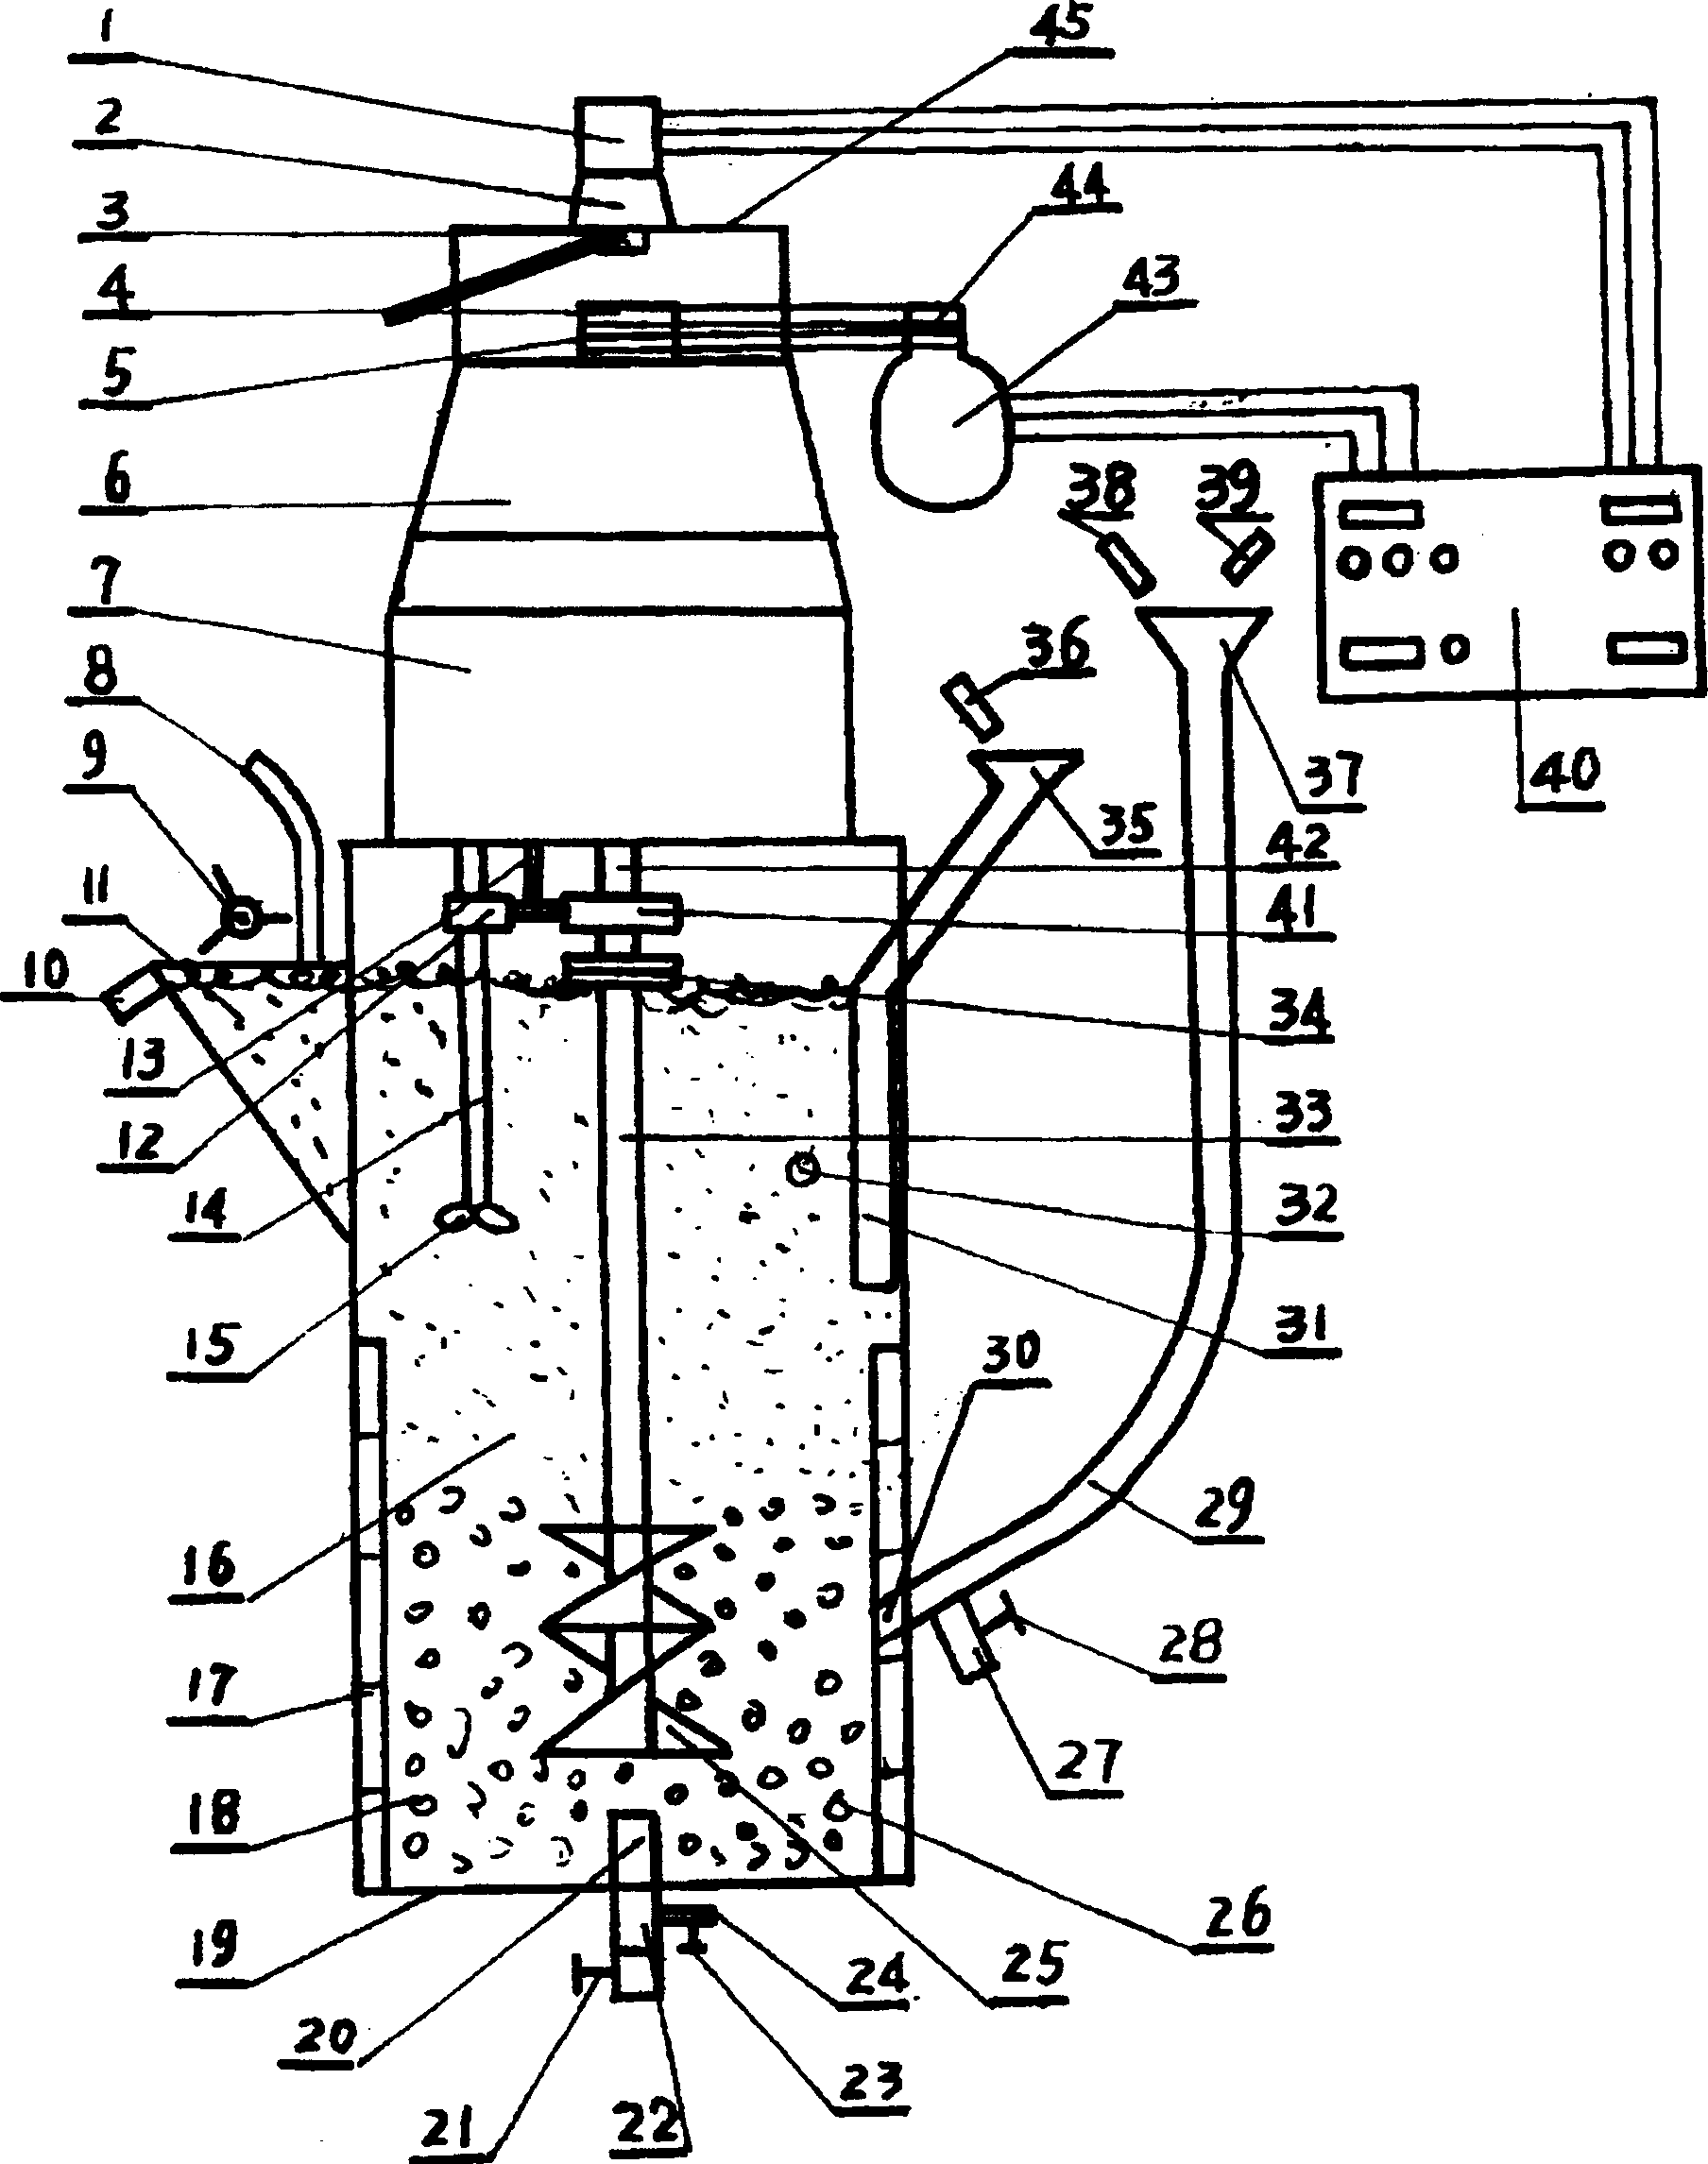 Grinding while floatation process for carrying out floatation separation in grinding